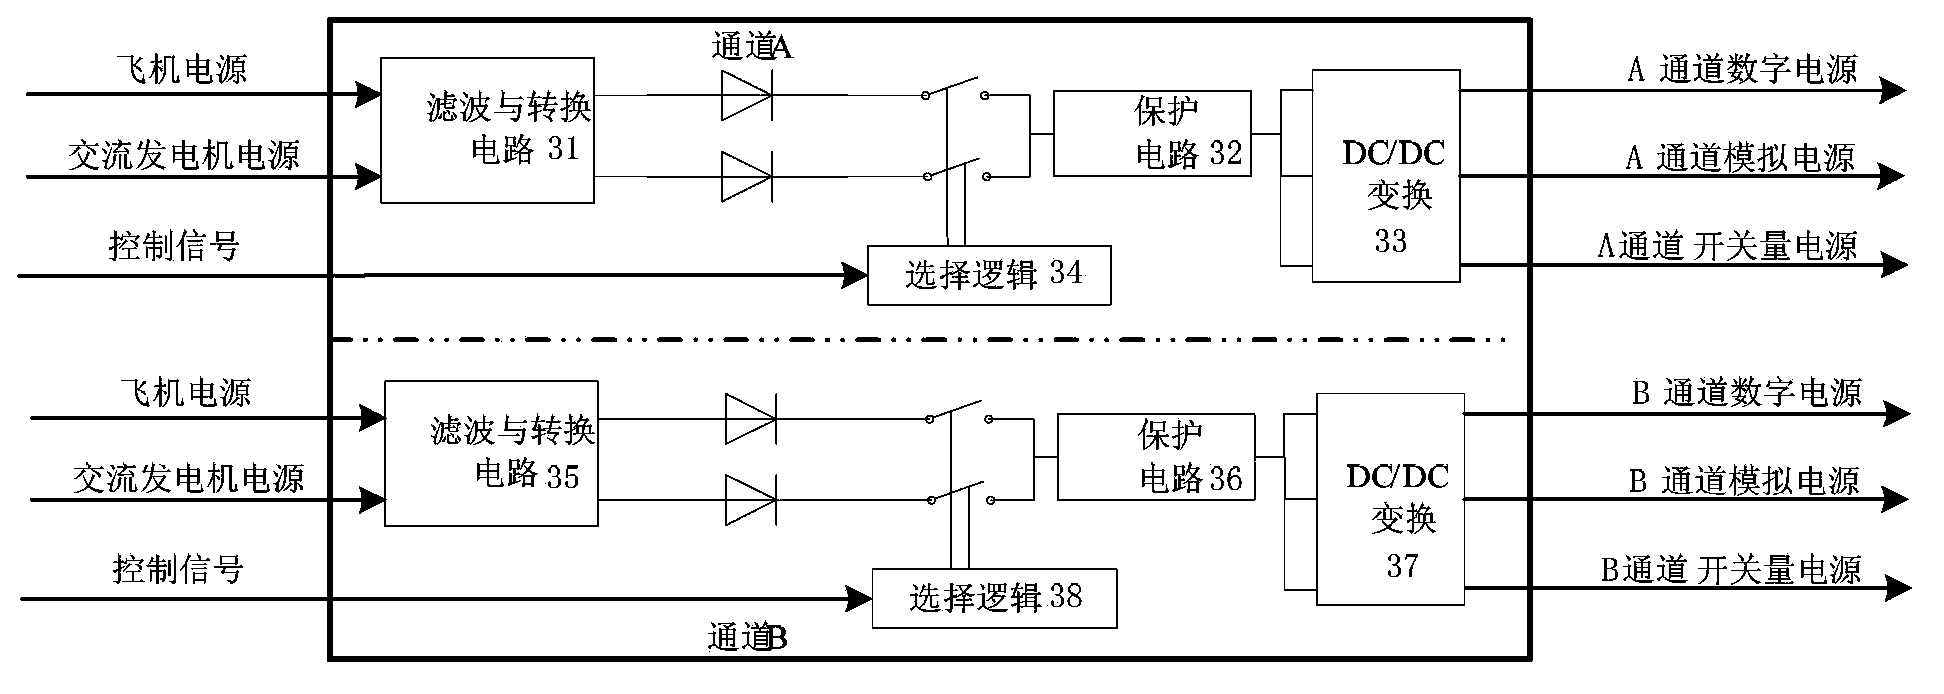 TTP/C (time-triggered protocol communication) bus-based electronic controller and FADEC (full authority digital engine control) system